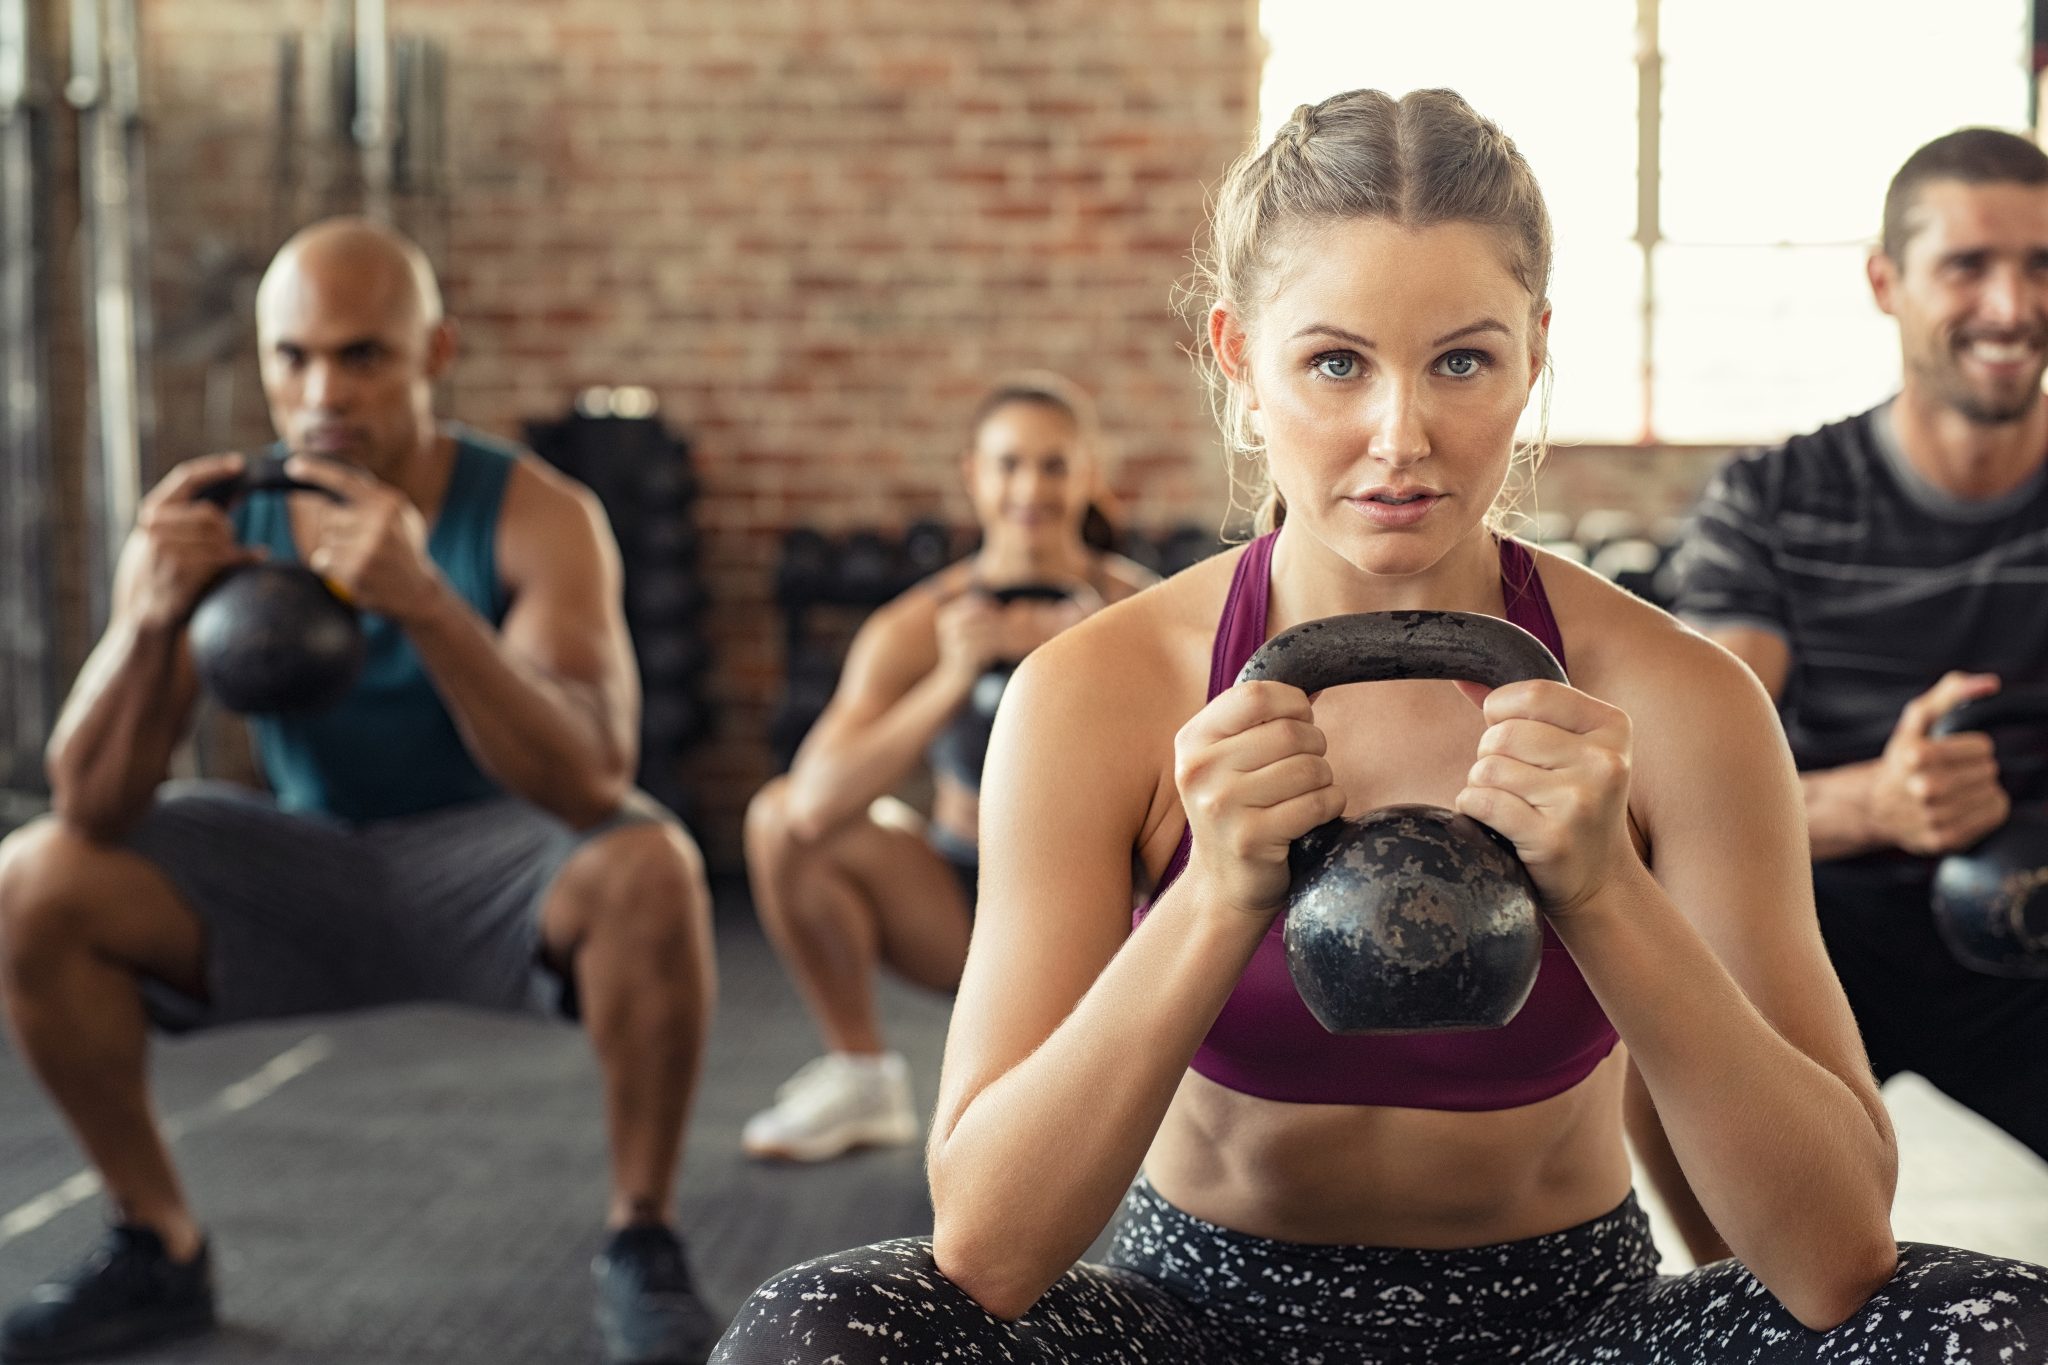 Do women need to train differently to men for weightloss? An